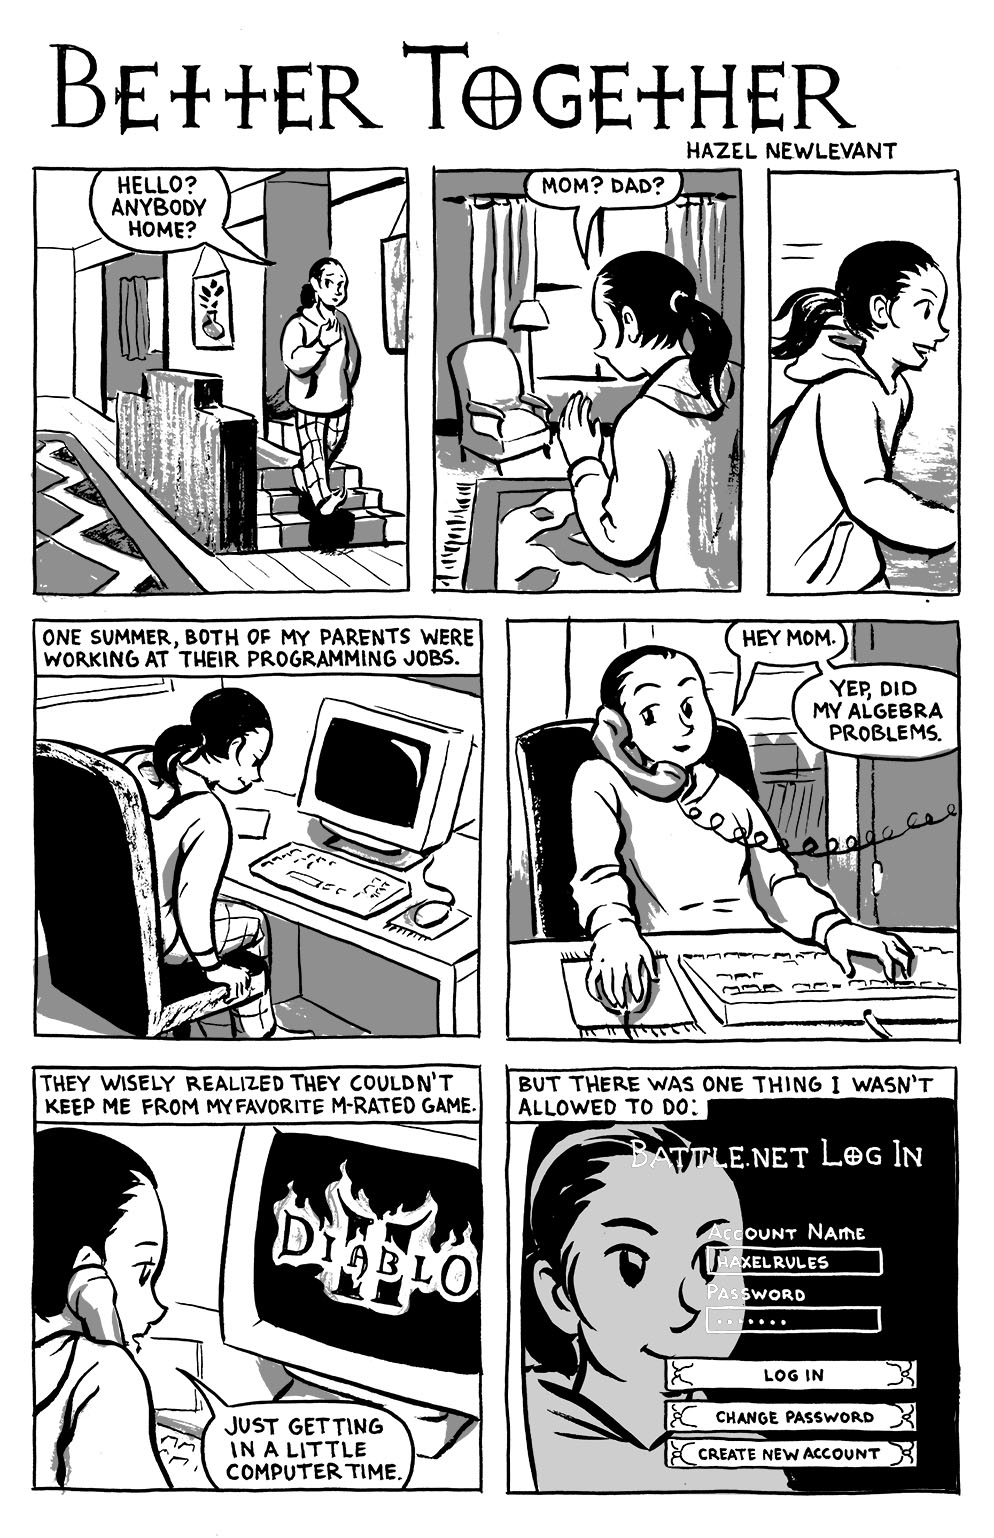 Check Out Some Amazingly Heartfelt Comics About Falling In Love With Games